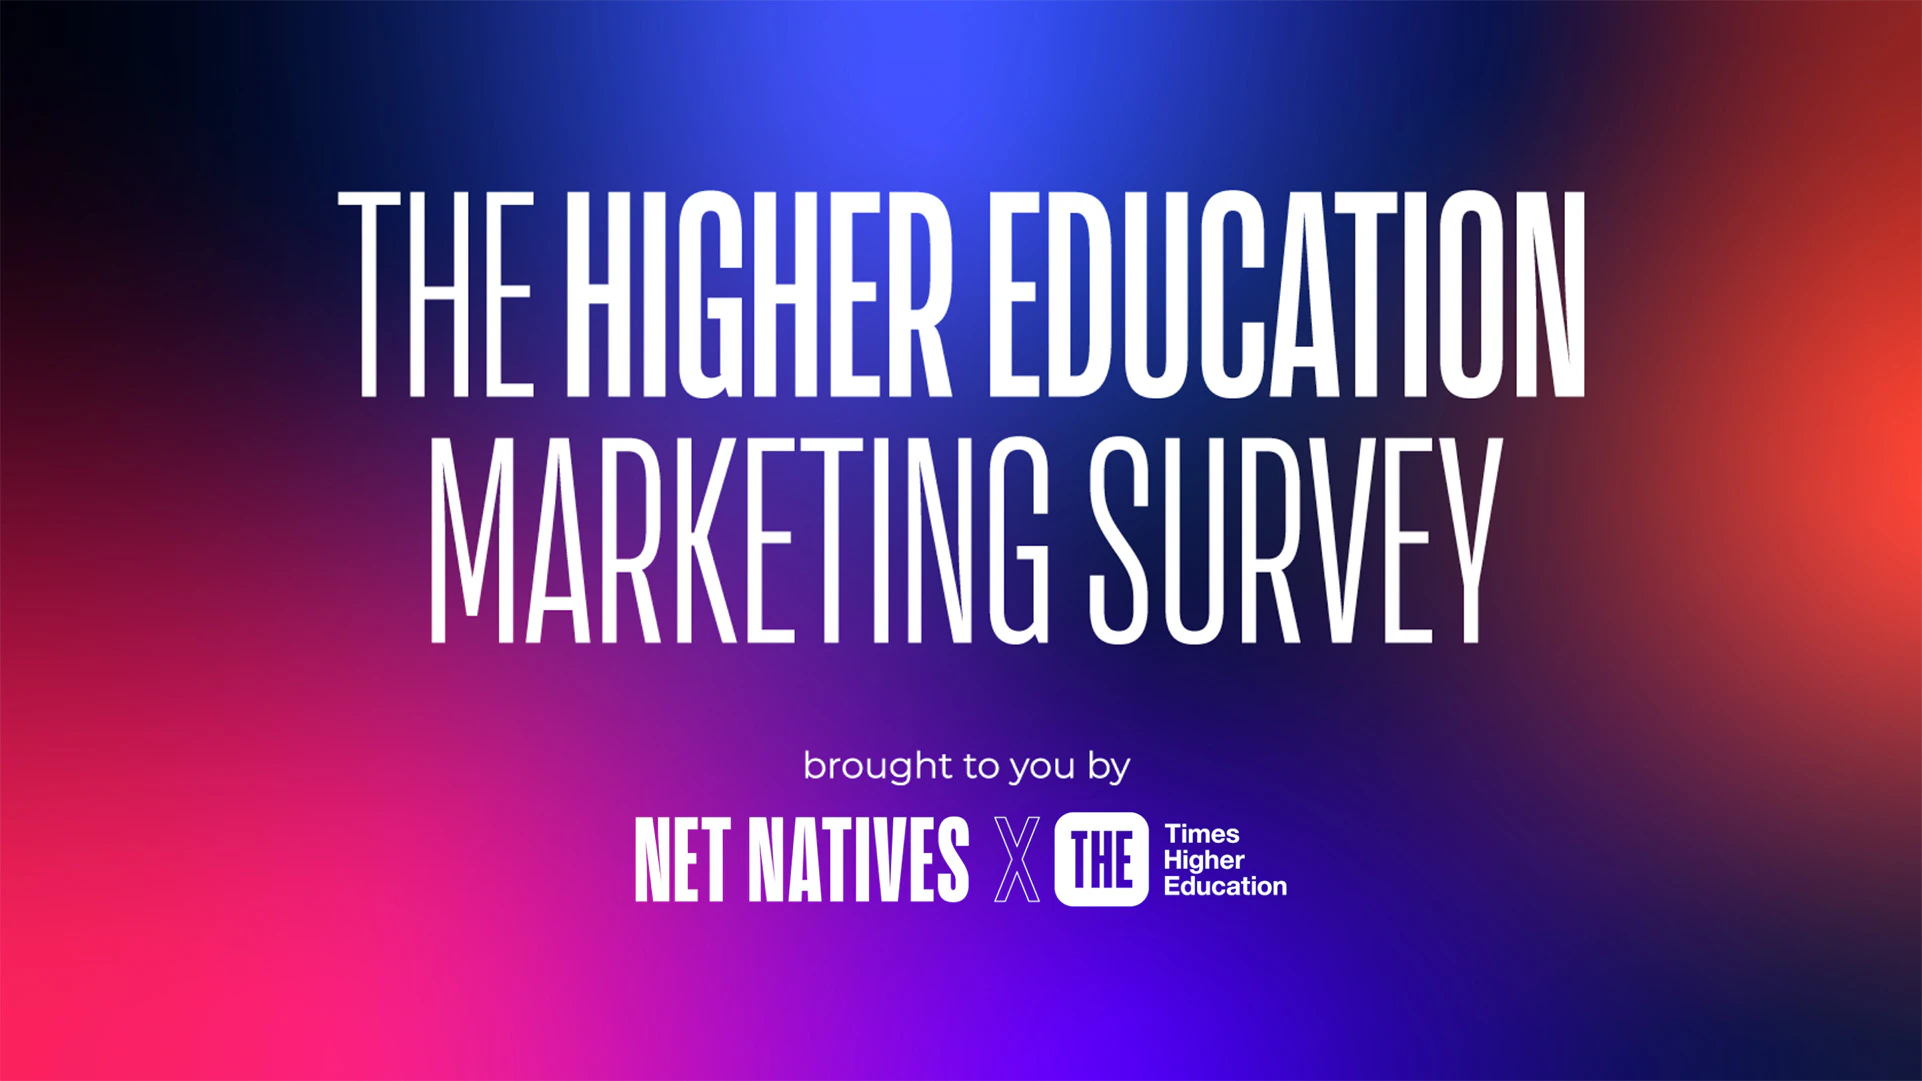 Blue and red screen with the words "The Higher Education Marketing Survey" 